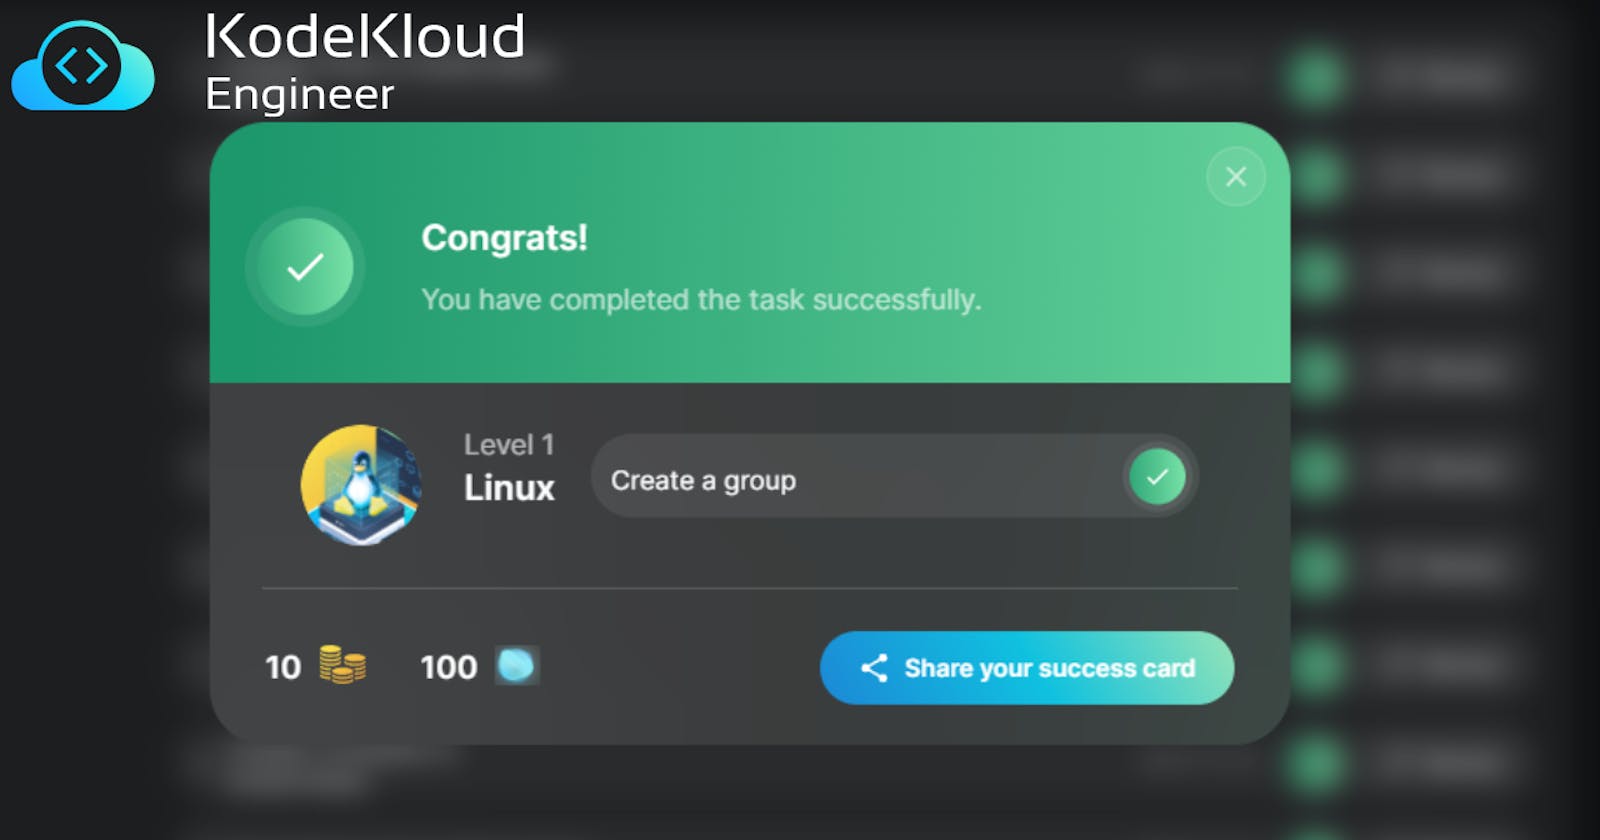 Step by step approach of Linux task on creating a group by the KodeKloud Engineer Program: